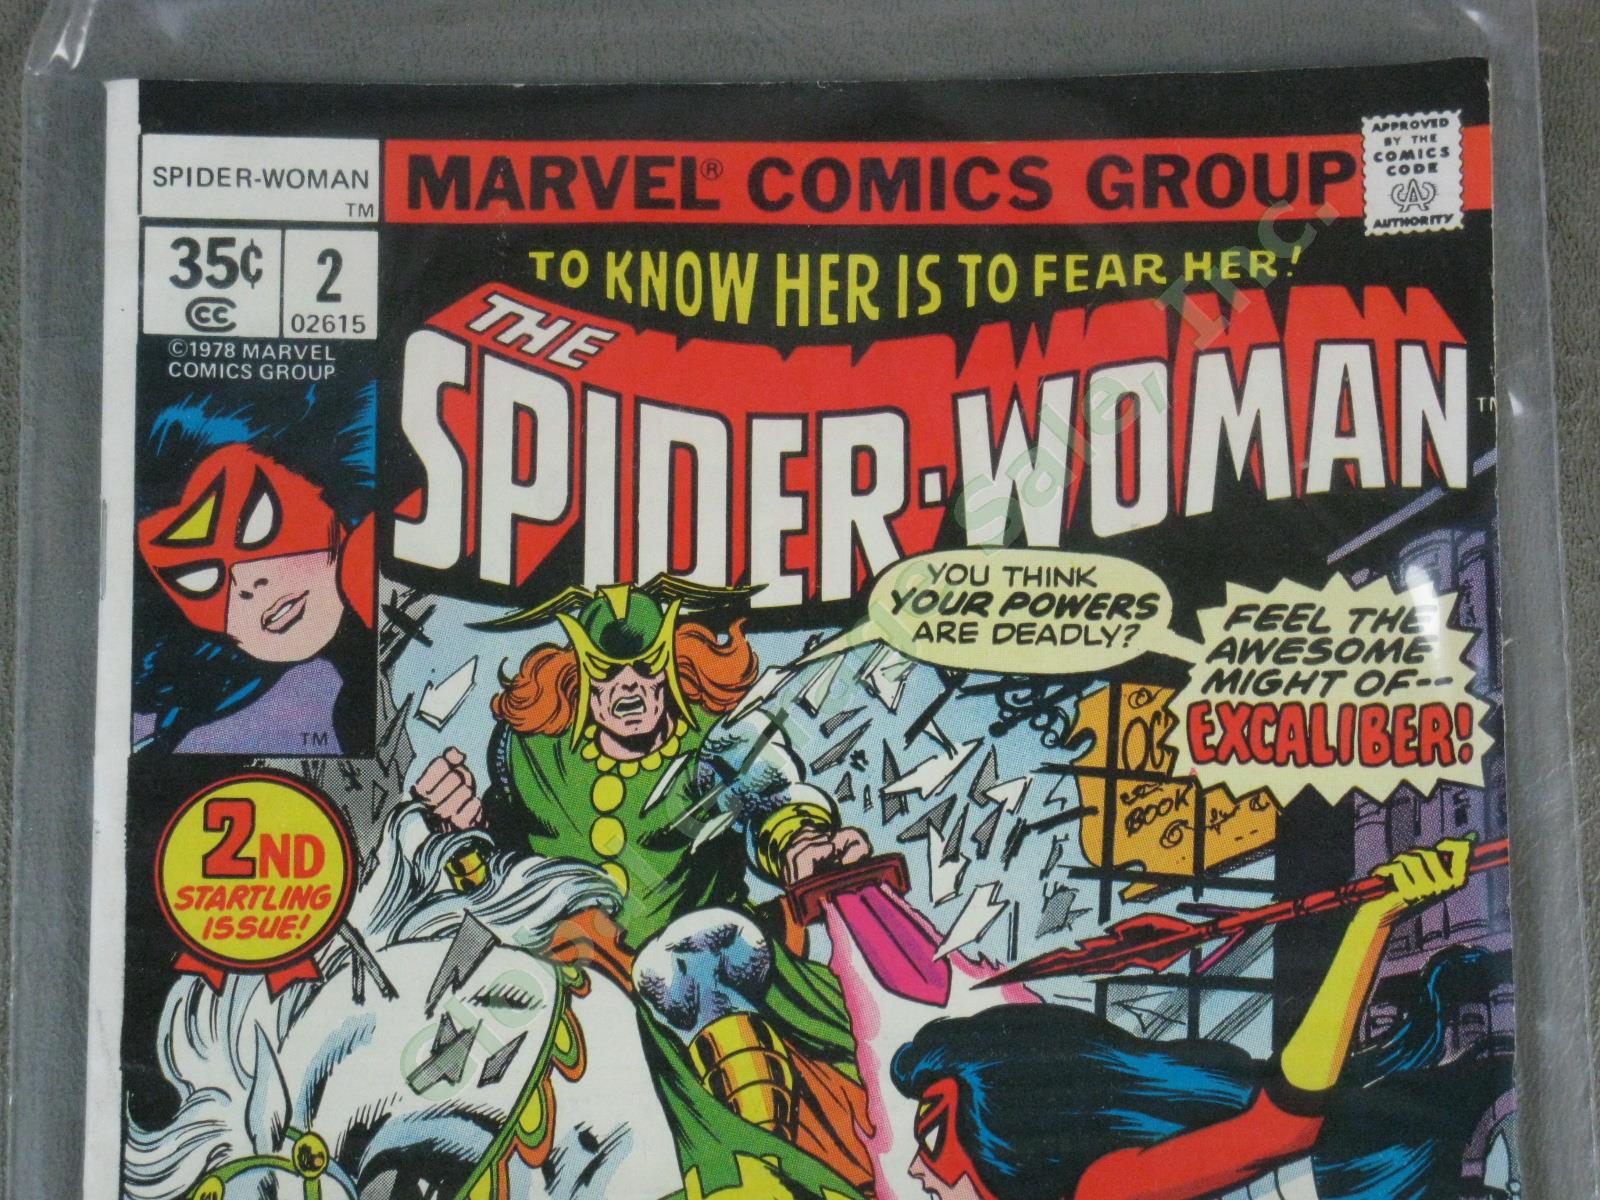 48 Vtg Marvel Spider-Woman Comic Book Collection Lot Runs 1-8 10-36 38-40 42-50 3